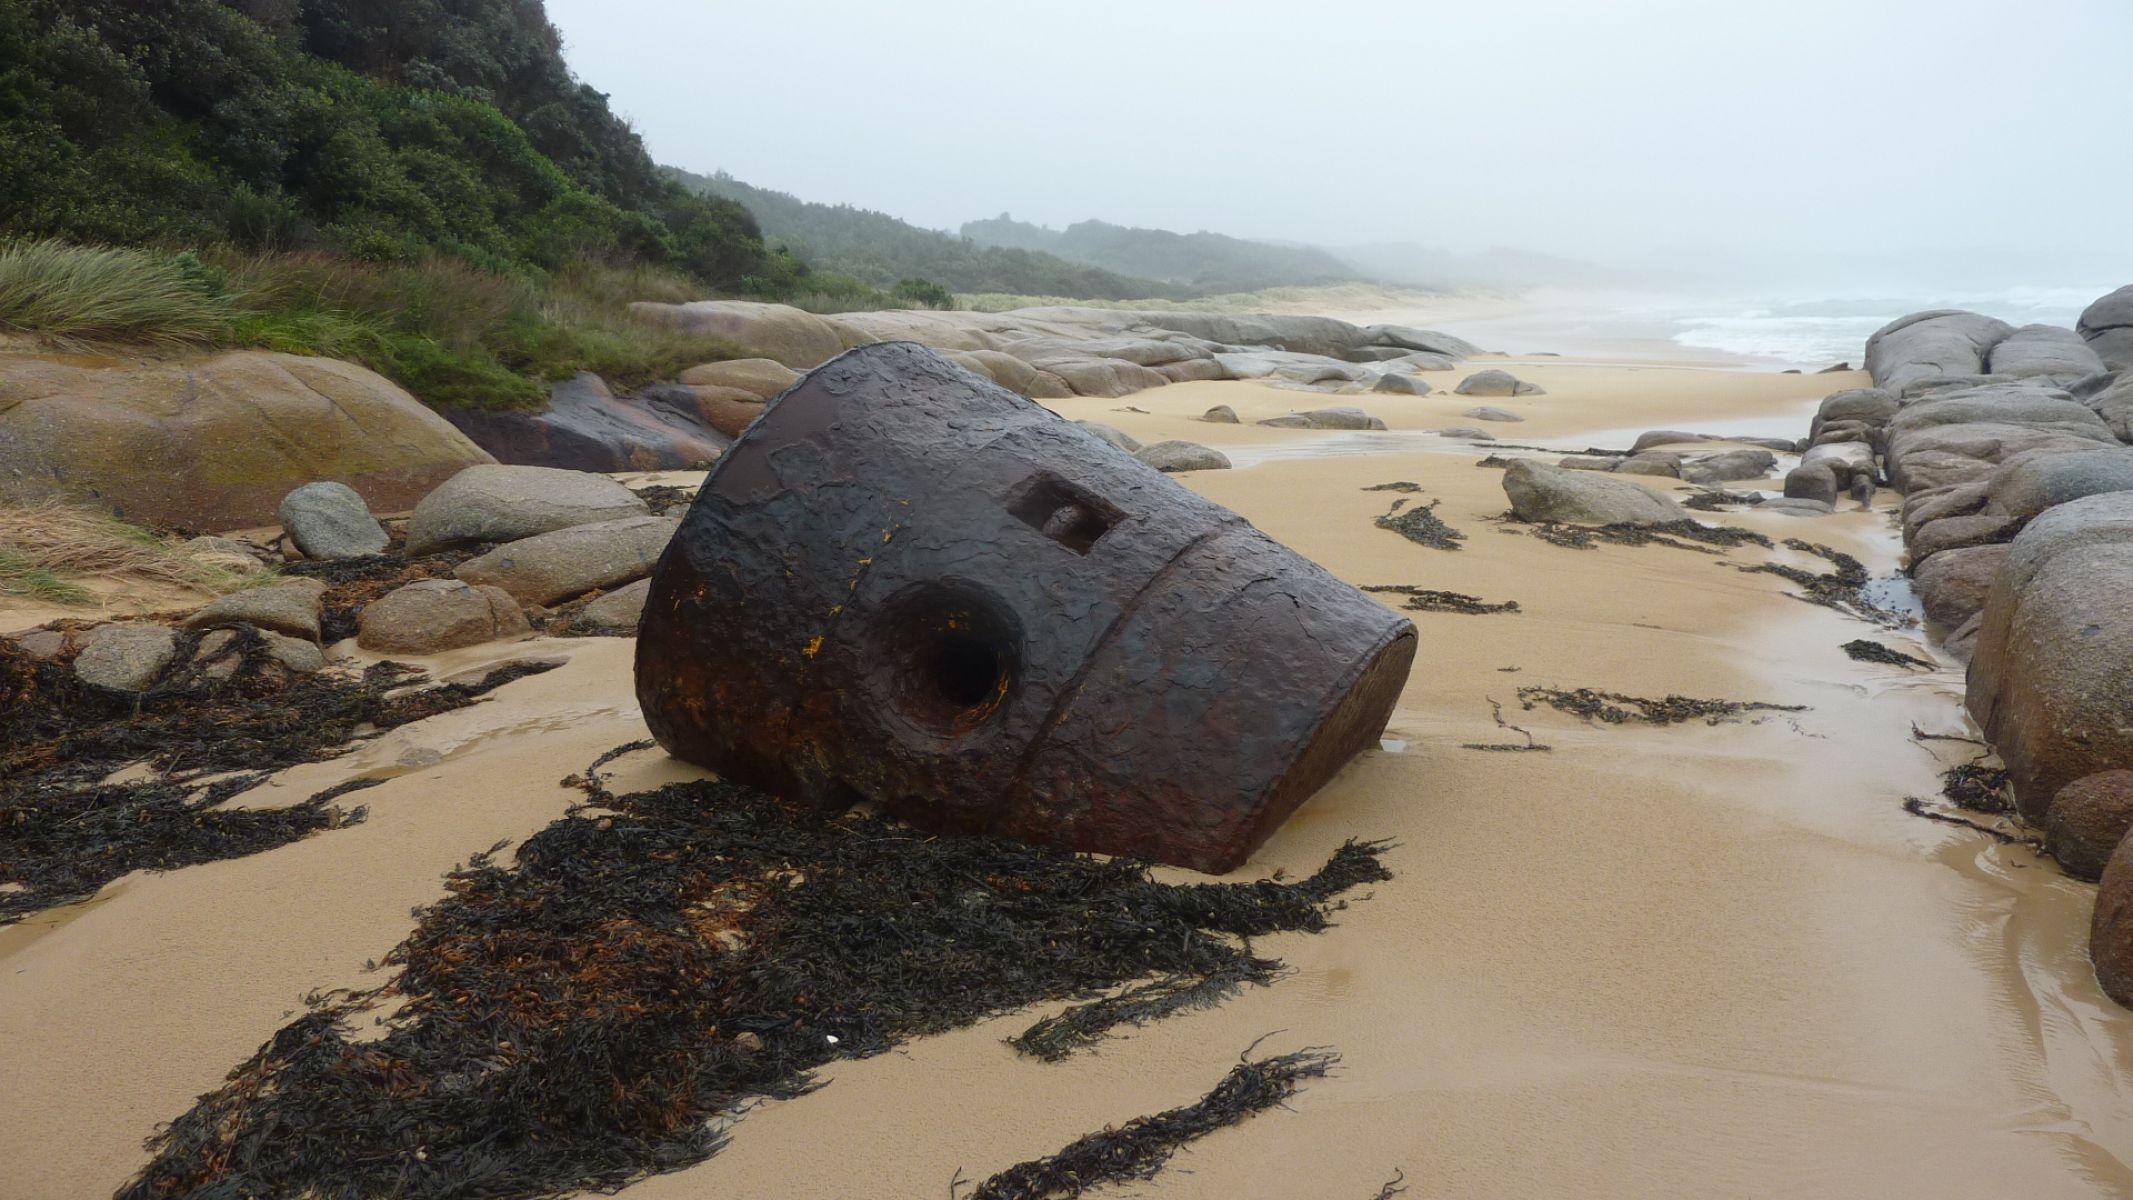 Image shows a cylindrical piece of wreckage on a beach